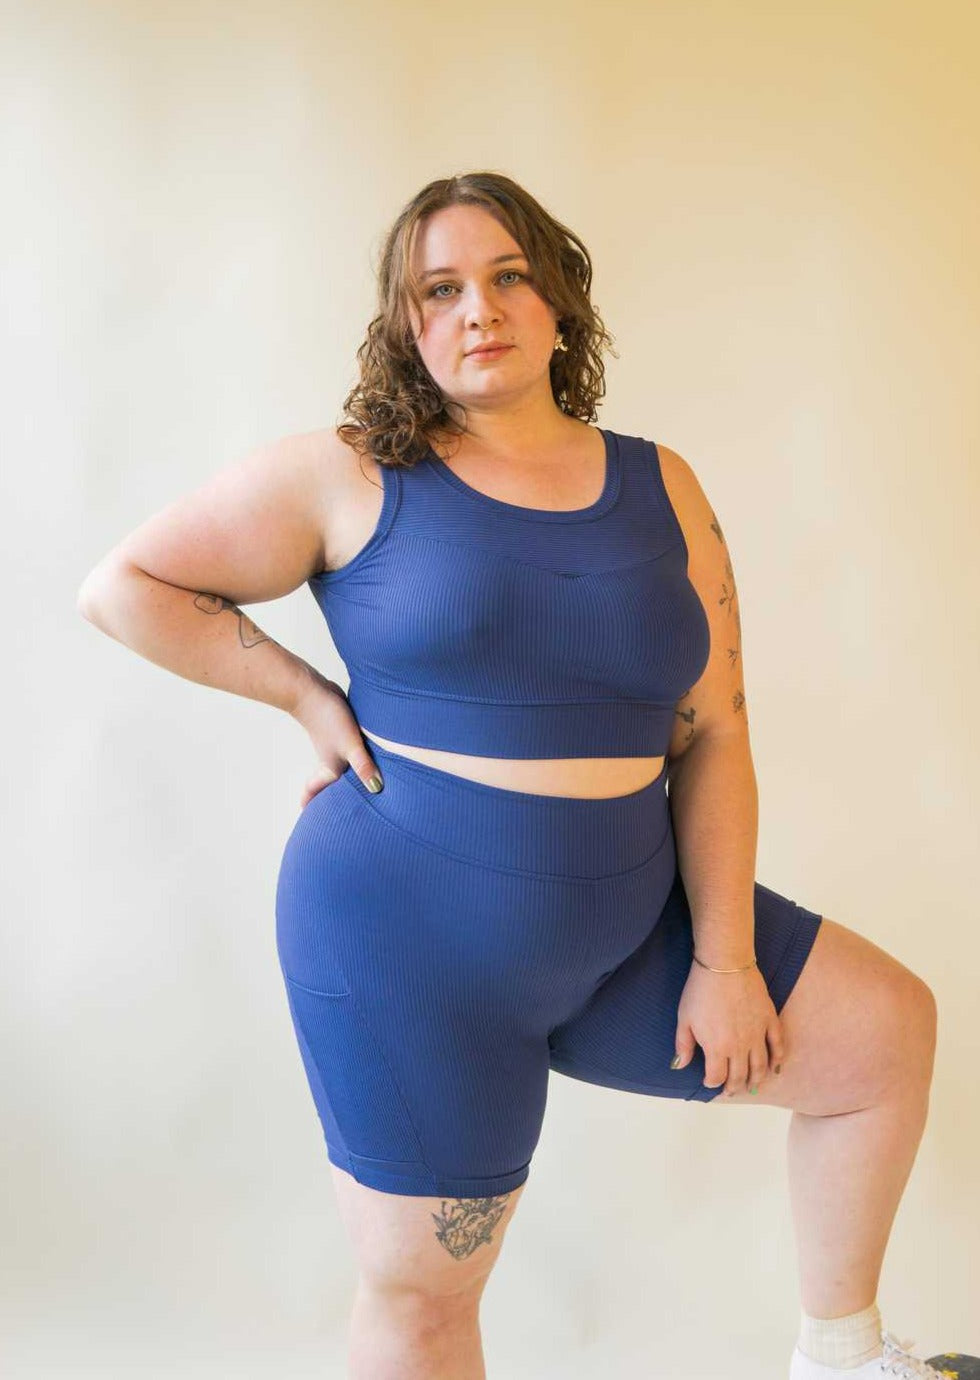 Bronco | Rib Knit Bralette Top in Navy, Street_and_Saddle, local_plus_size_inclusive_ethical